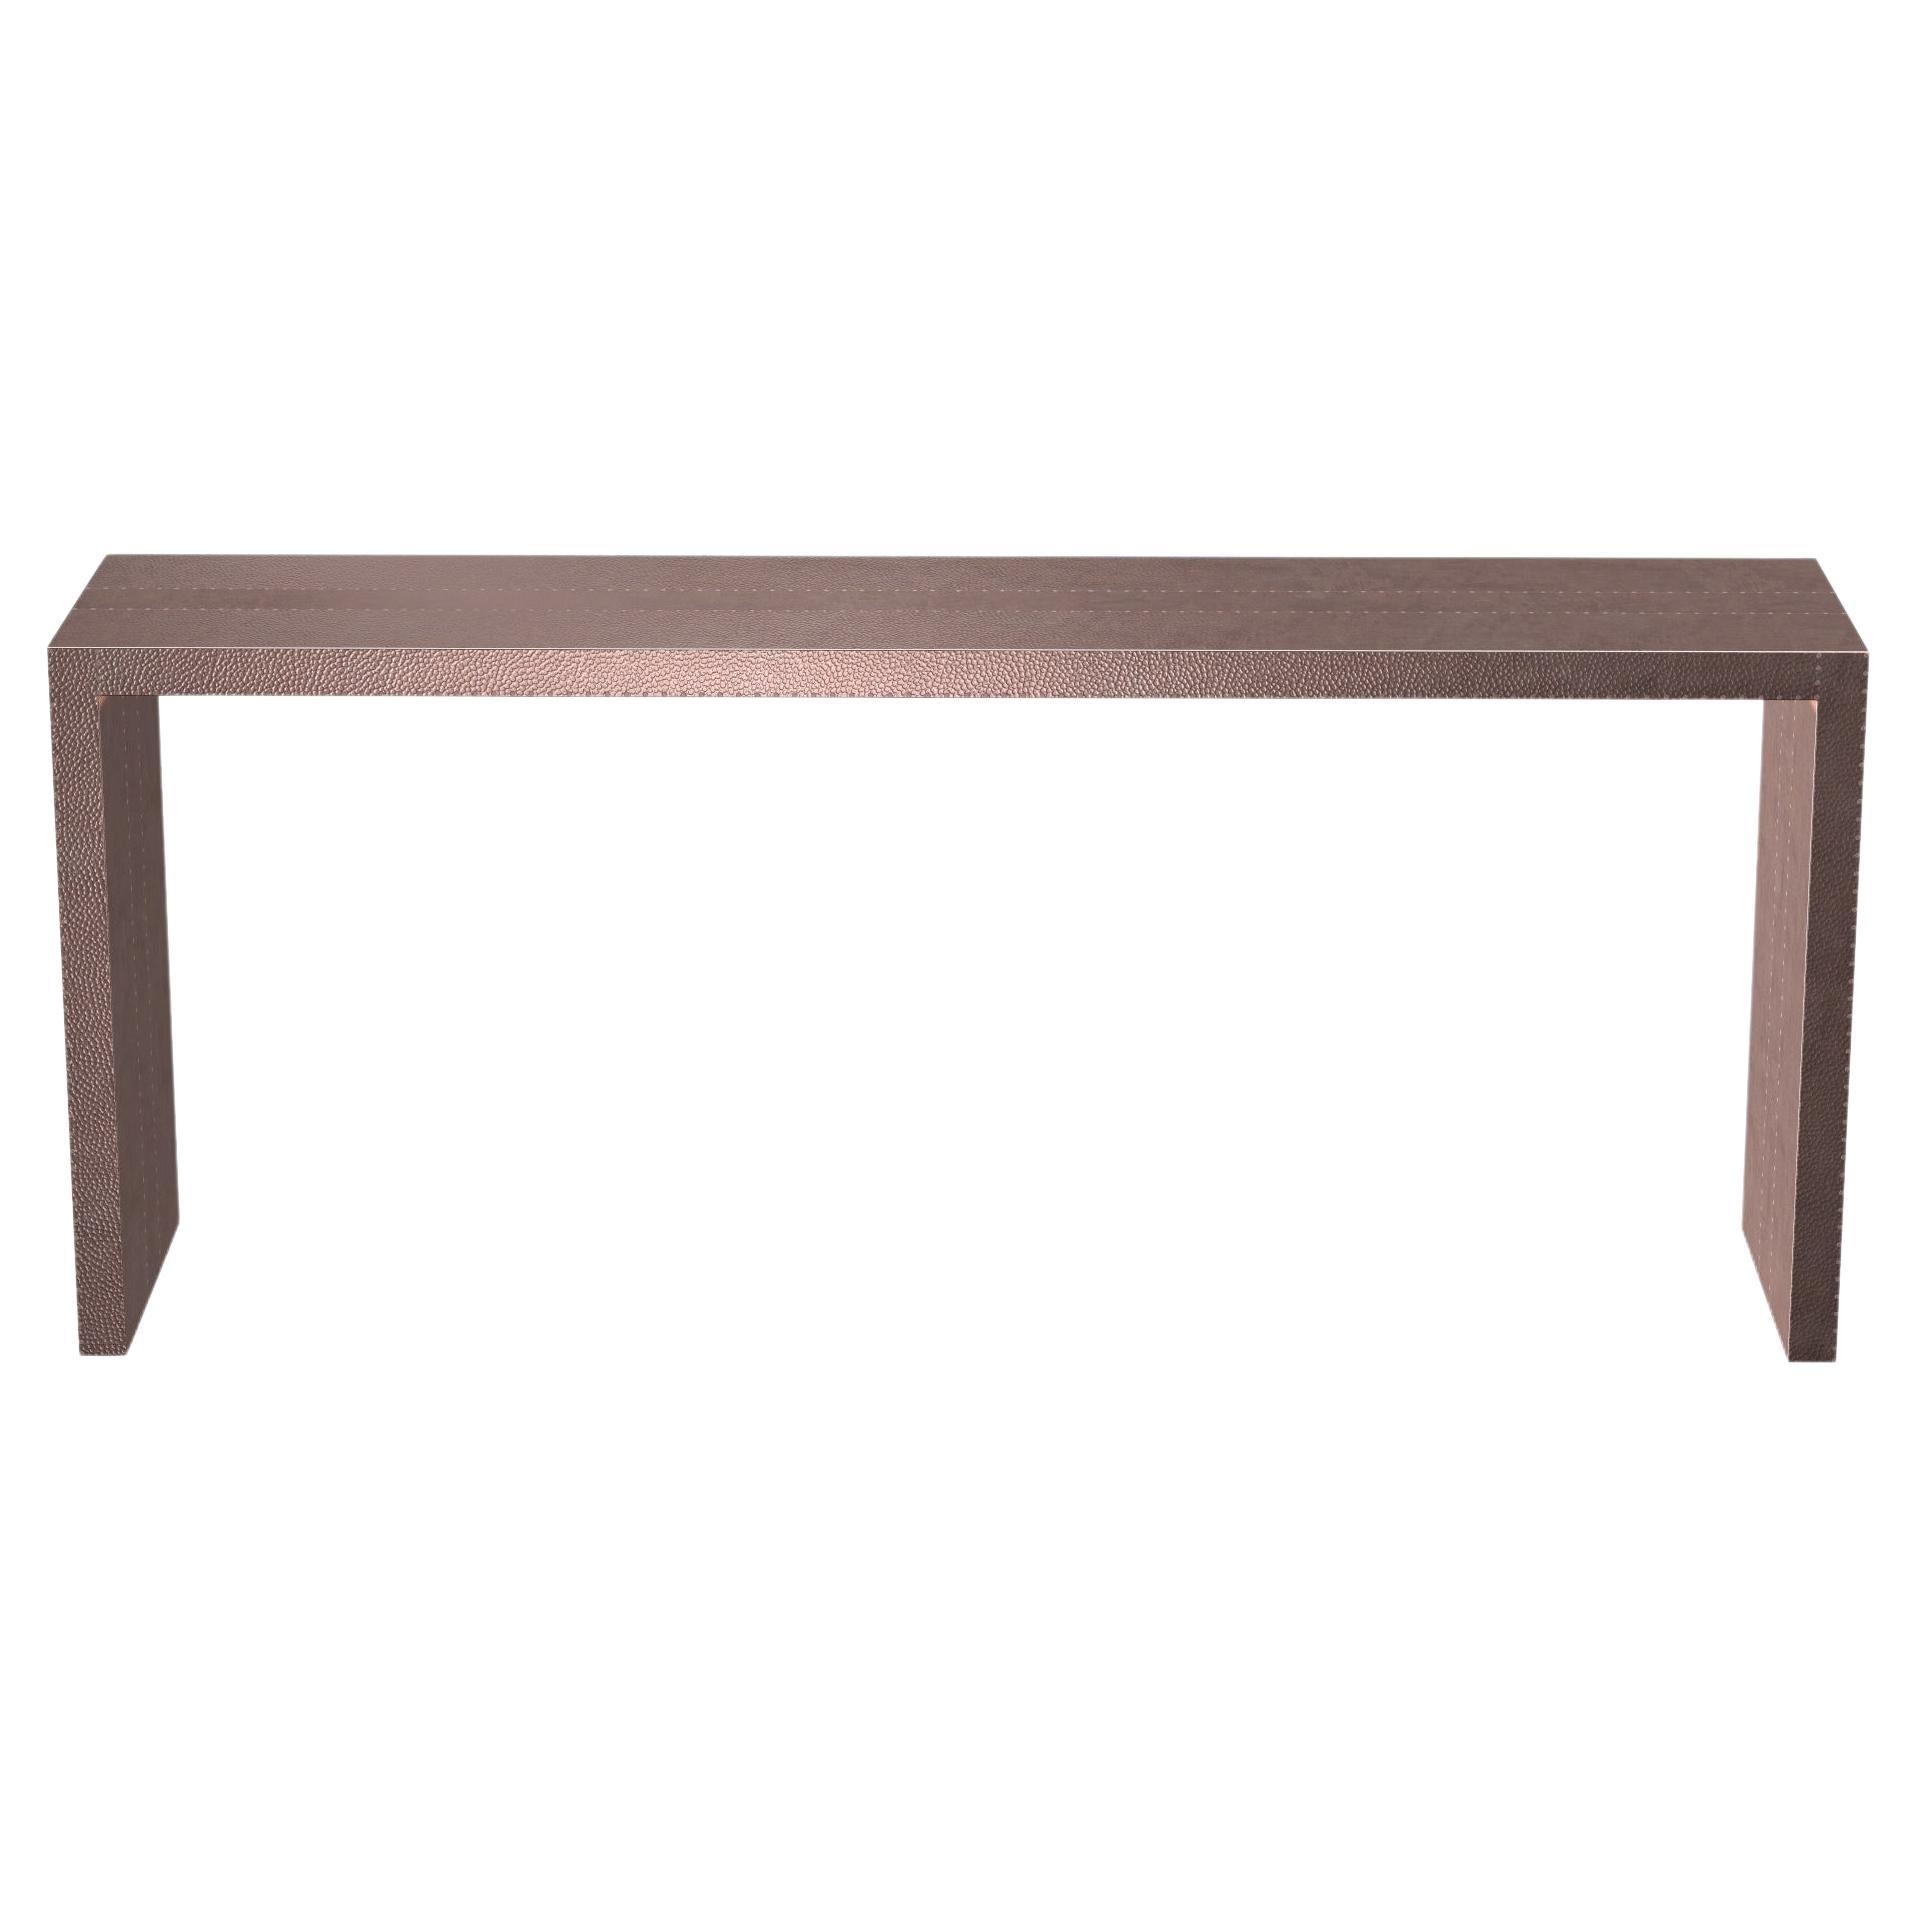 Art Deco Card Tables and Tea Console Tables Mid.Hammered in Copper  by Alison S For Sale